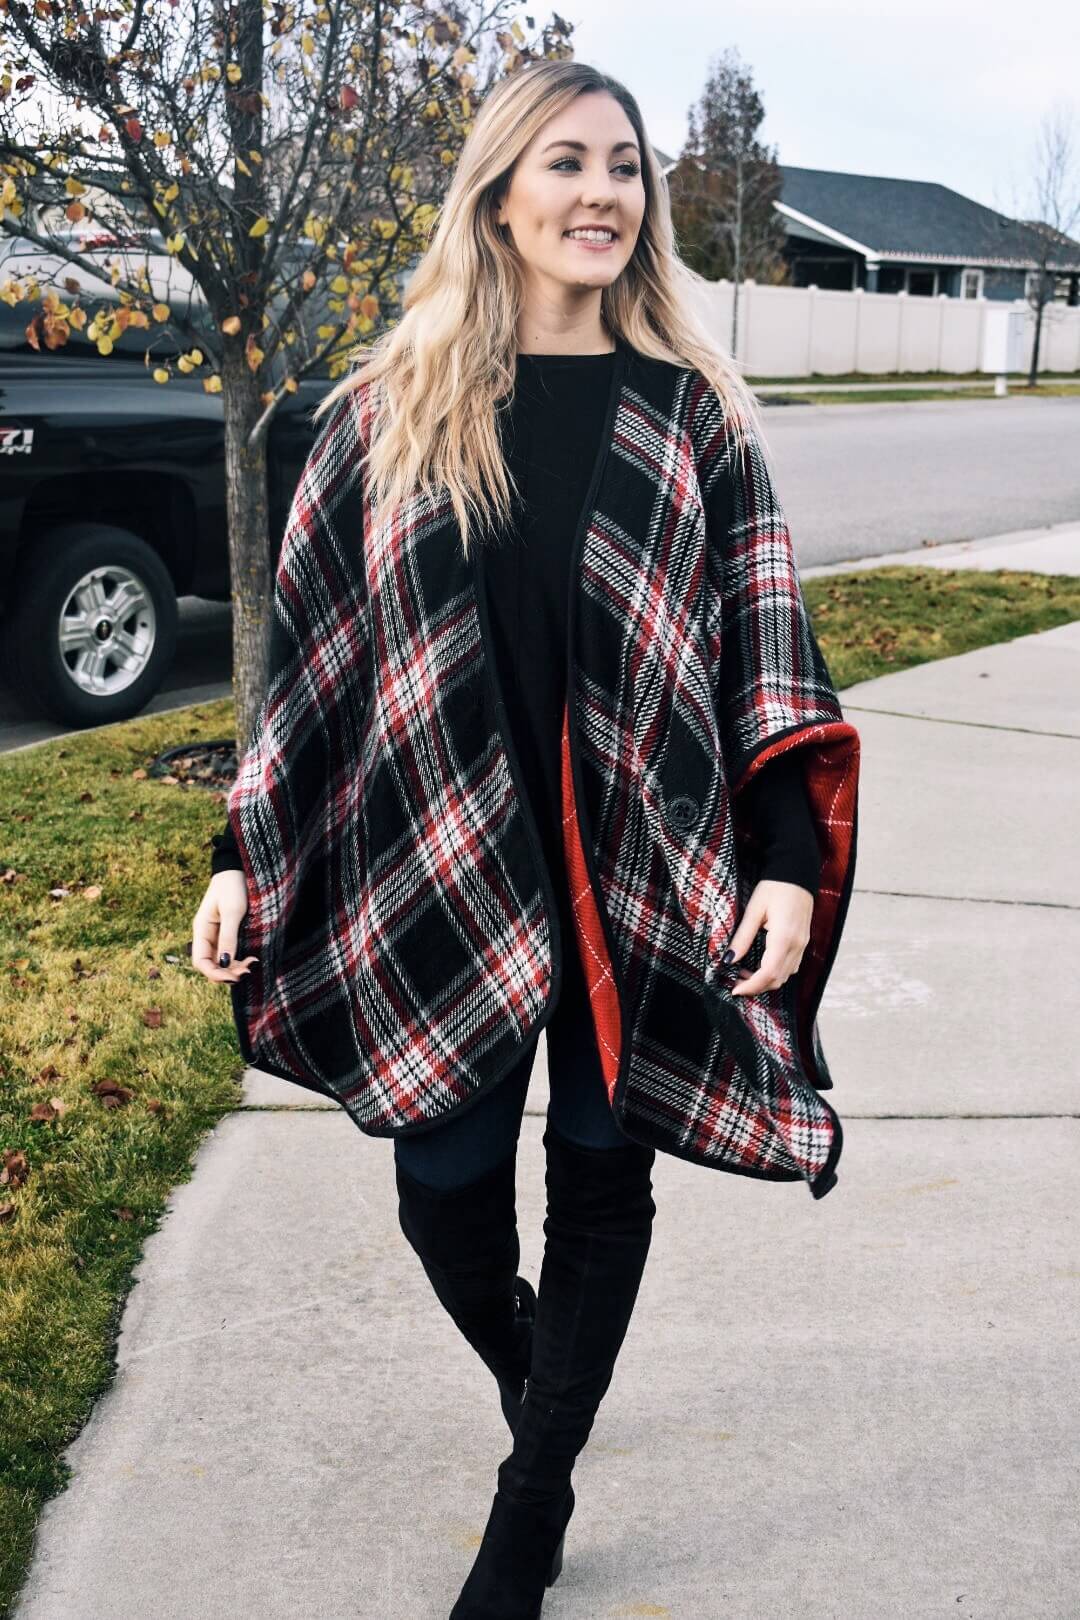 Fall outfits of 2018